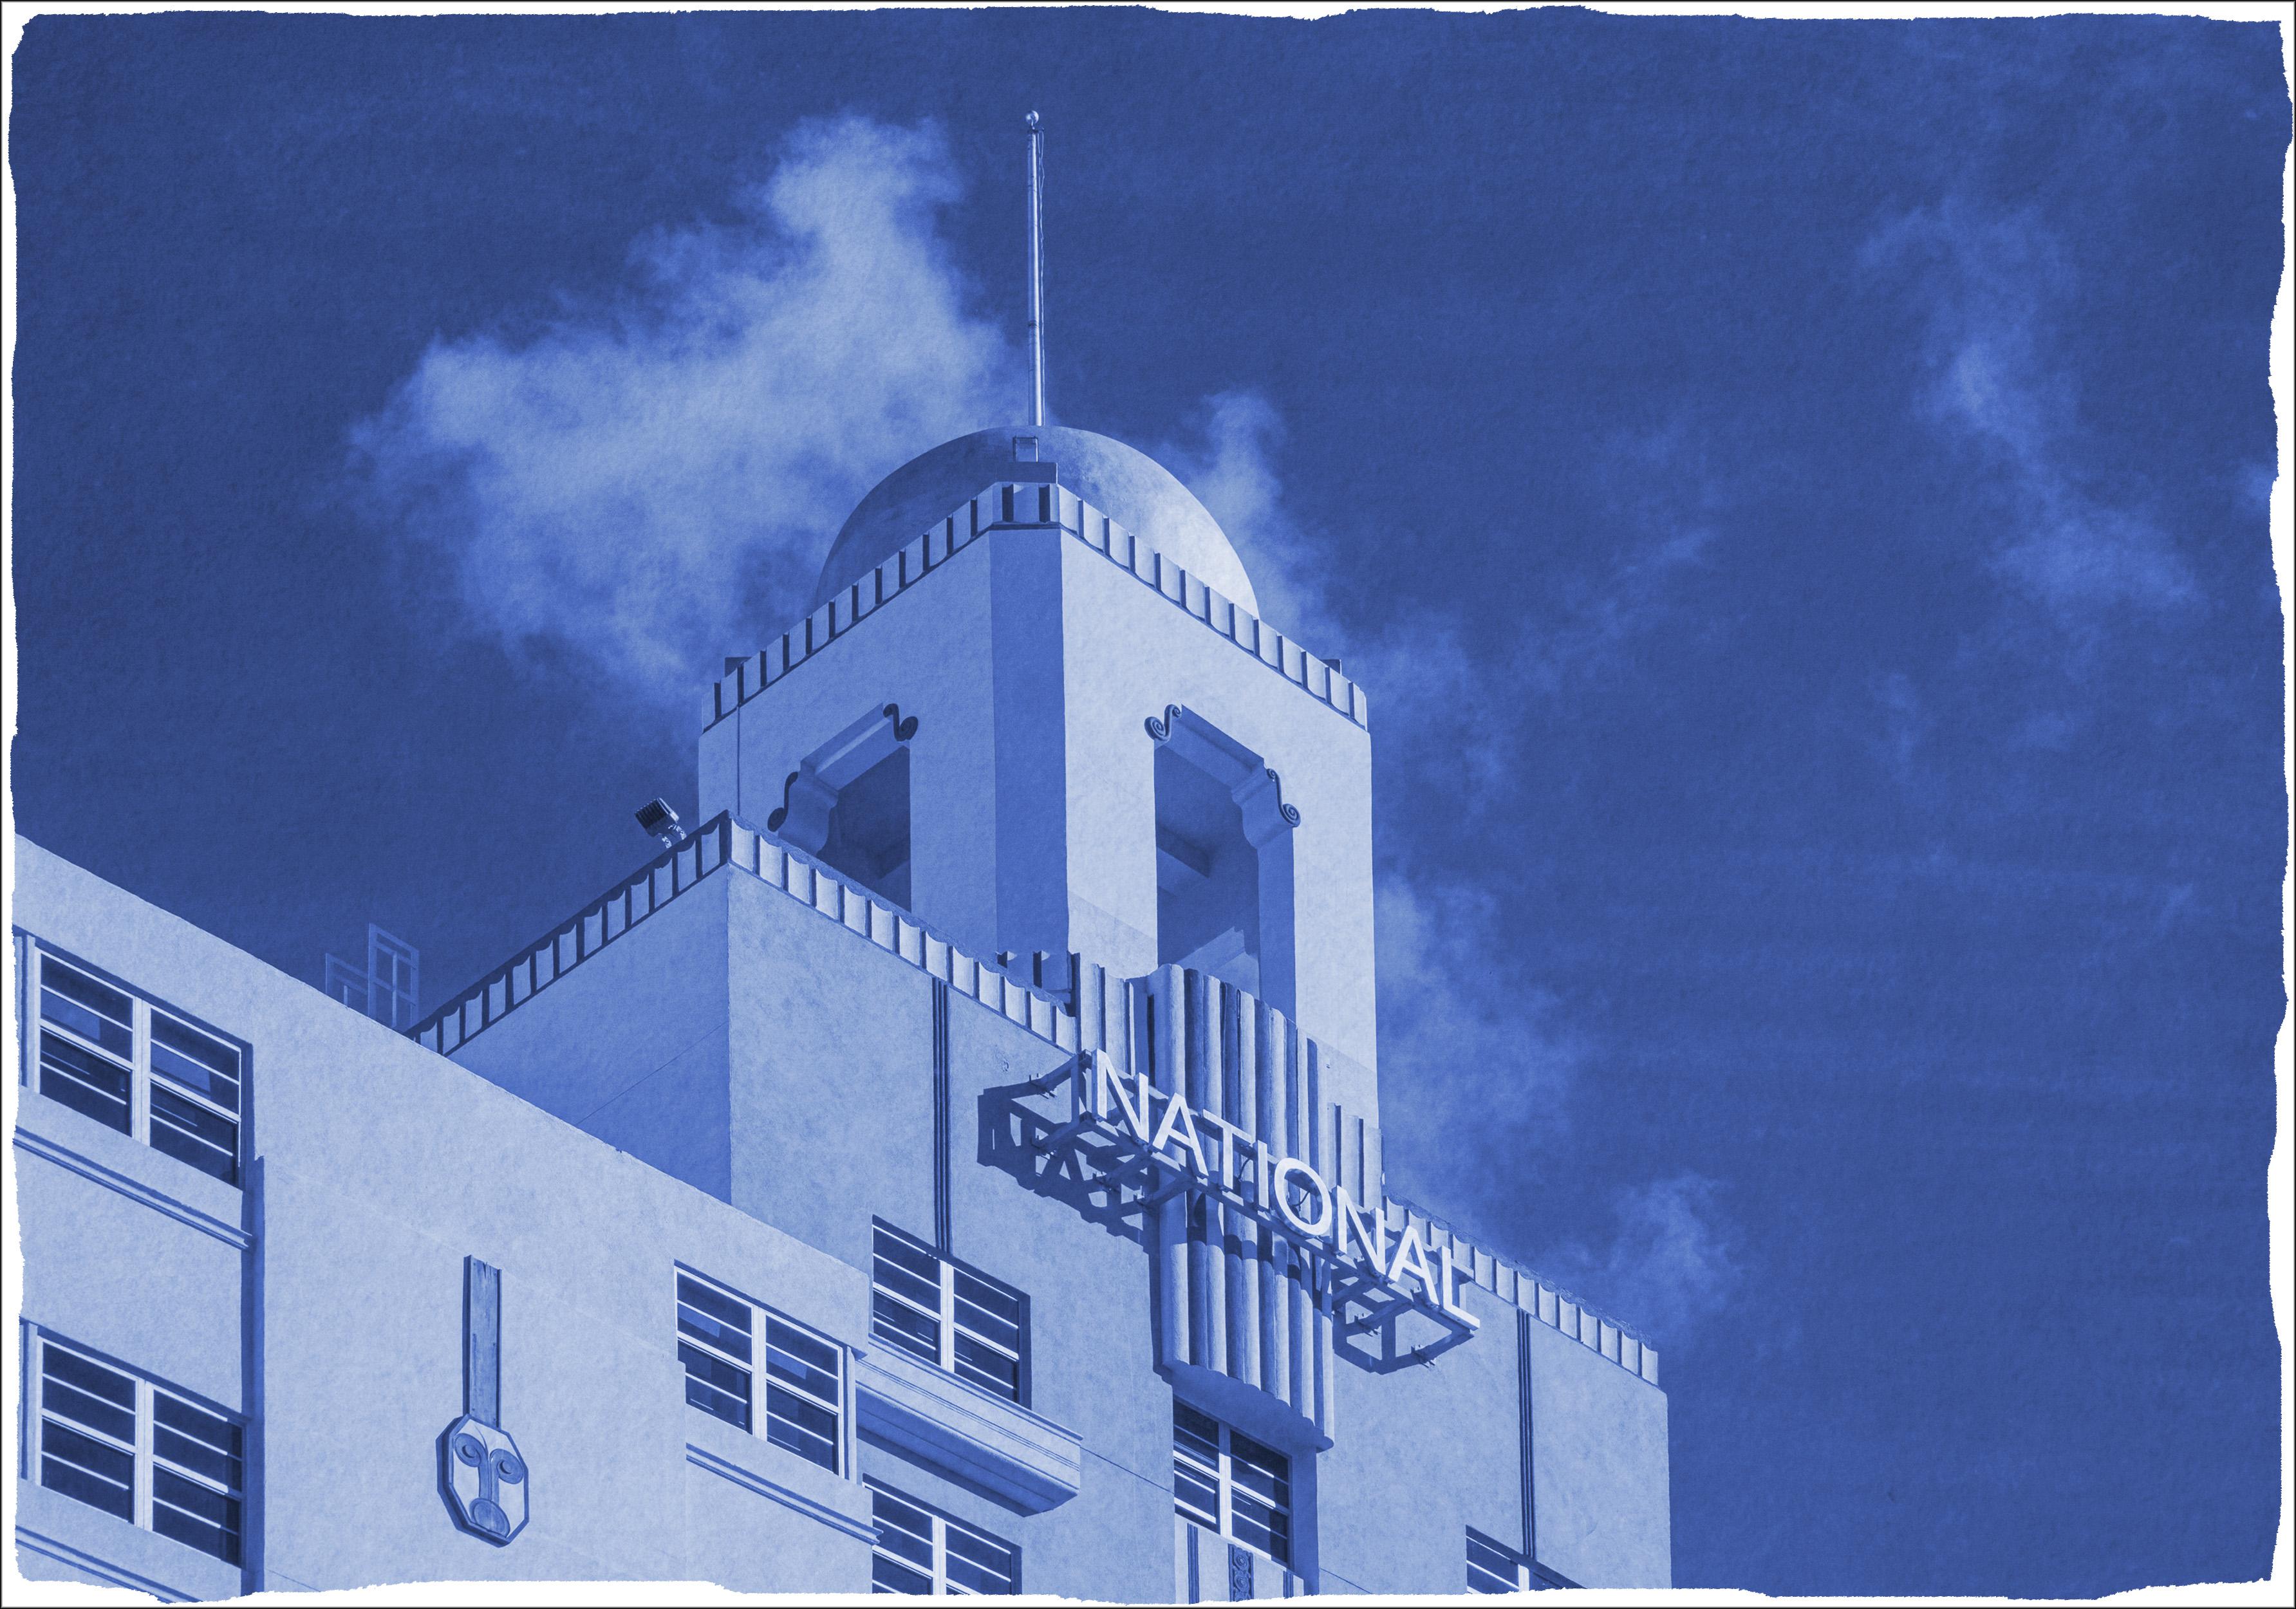 The National, Art Deco Architecture, Miami Buildings in Blue, Handmade Cyanotype